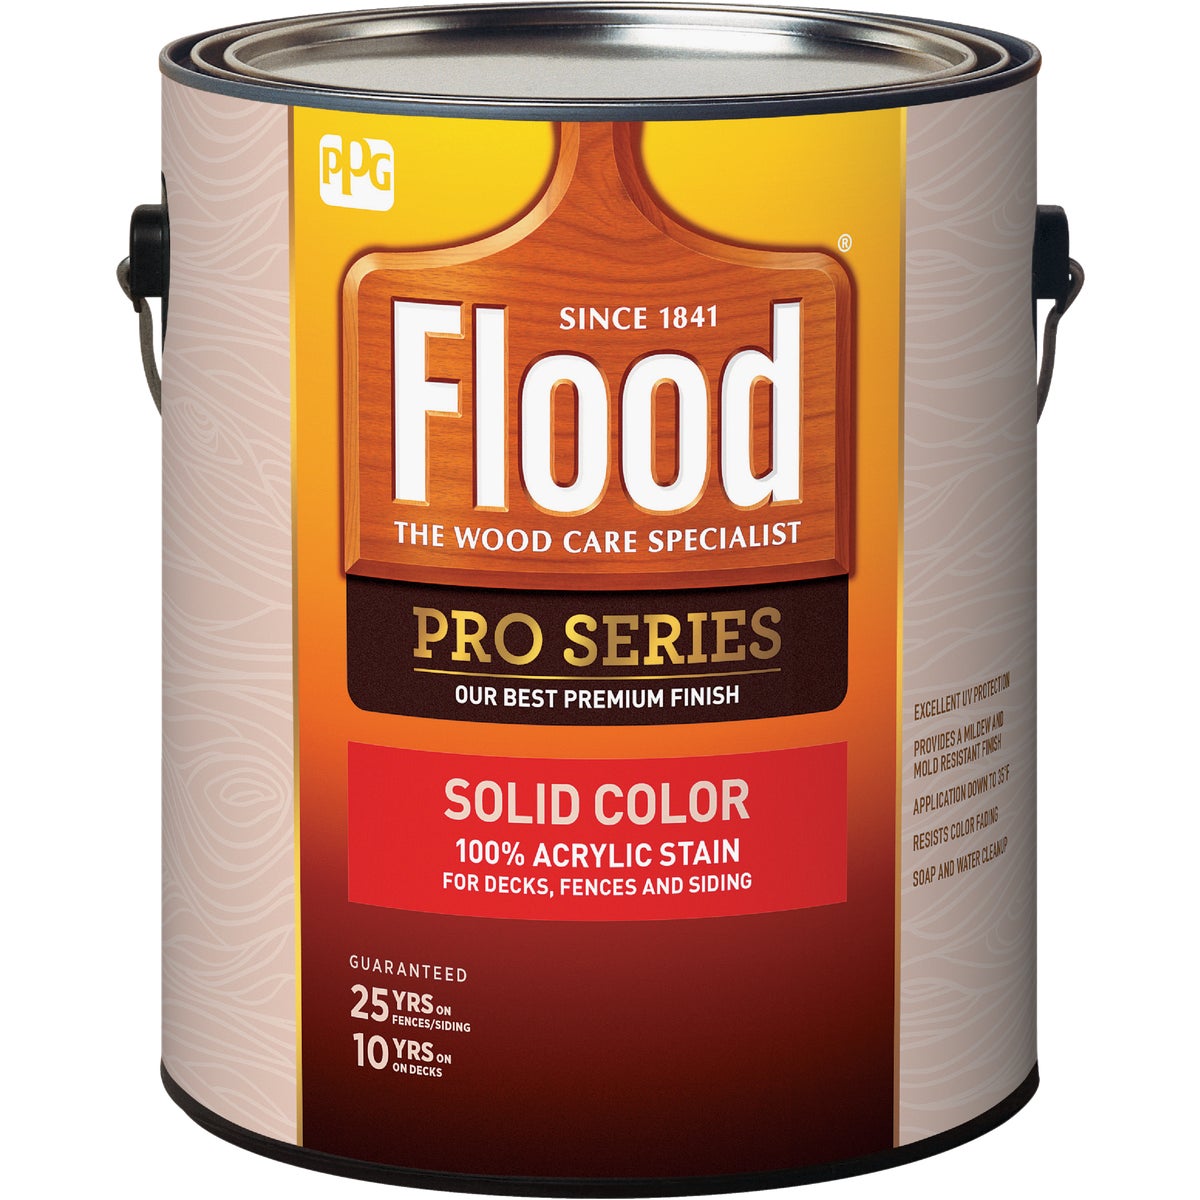 Flood 100% Acrylic Solid Color Deck, Fence And Siding Exterior Stain, Navajo Red, 1 Gal.